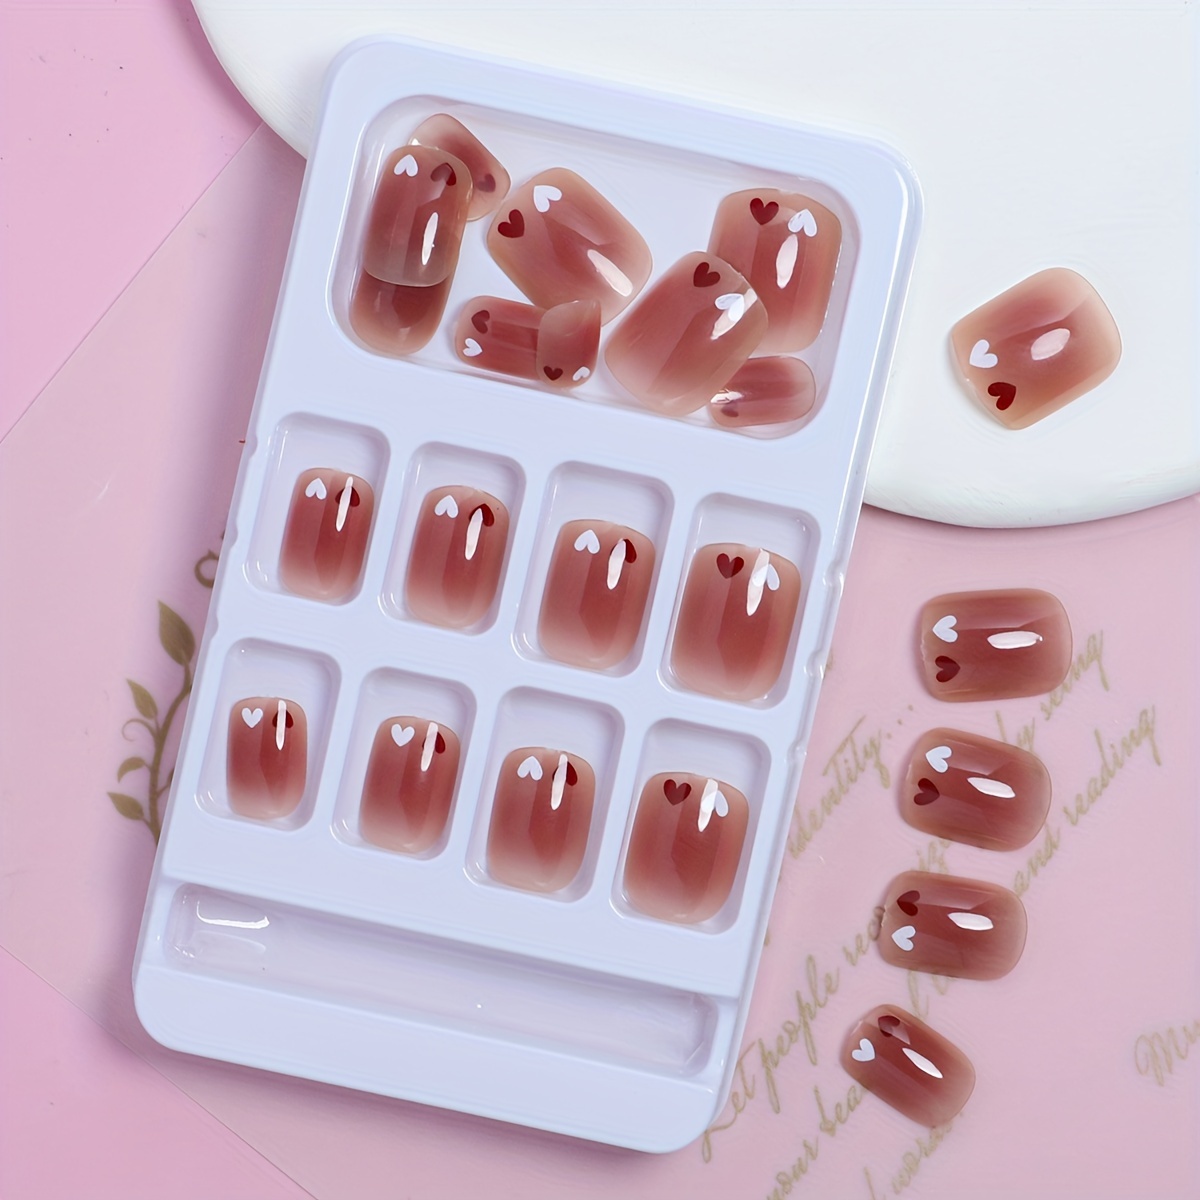 [Perfect Gift for Girls/Womens] Fofosbeauty 24pcs Short Square Fake Nails False Nails Glossy Press on Nails for Women and Girls, Matte Jelly Heart